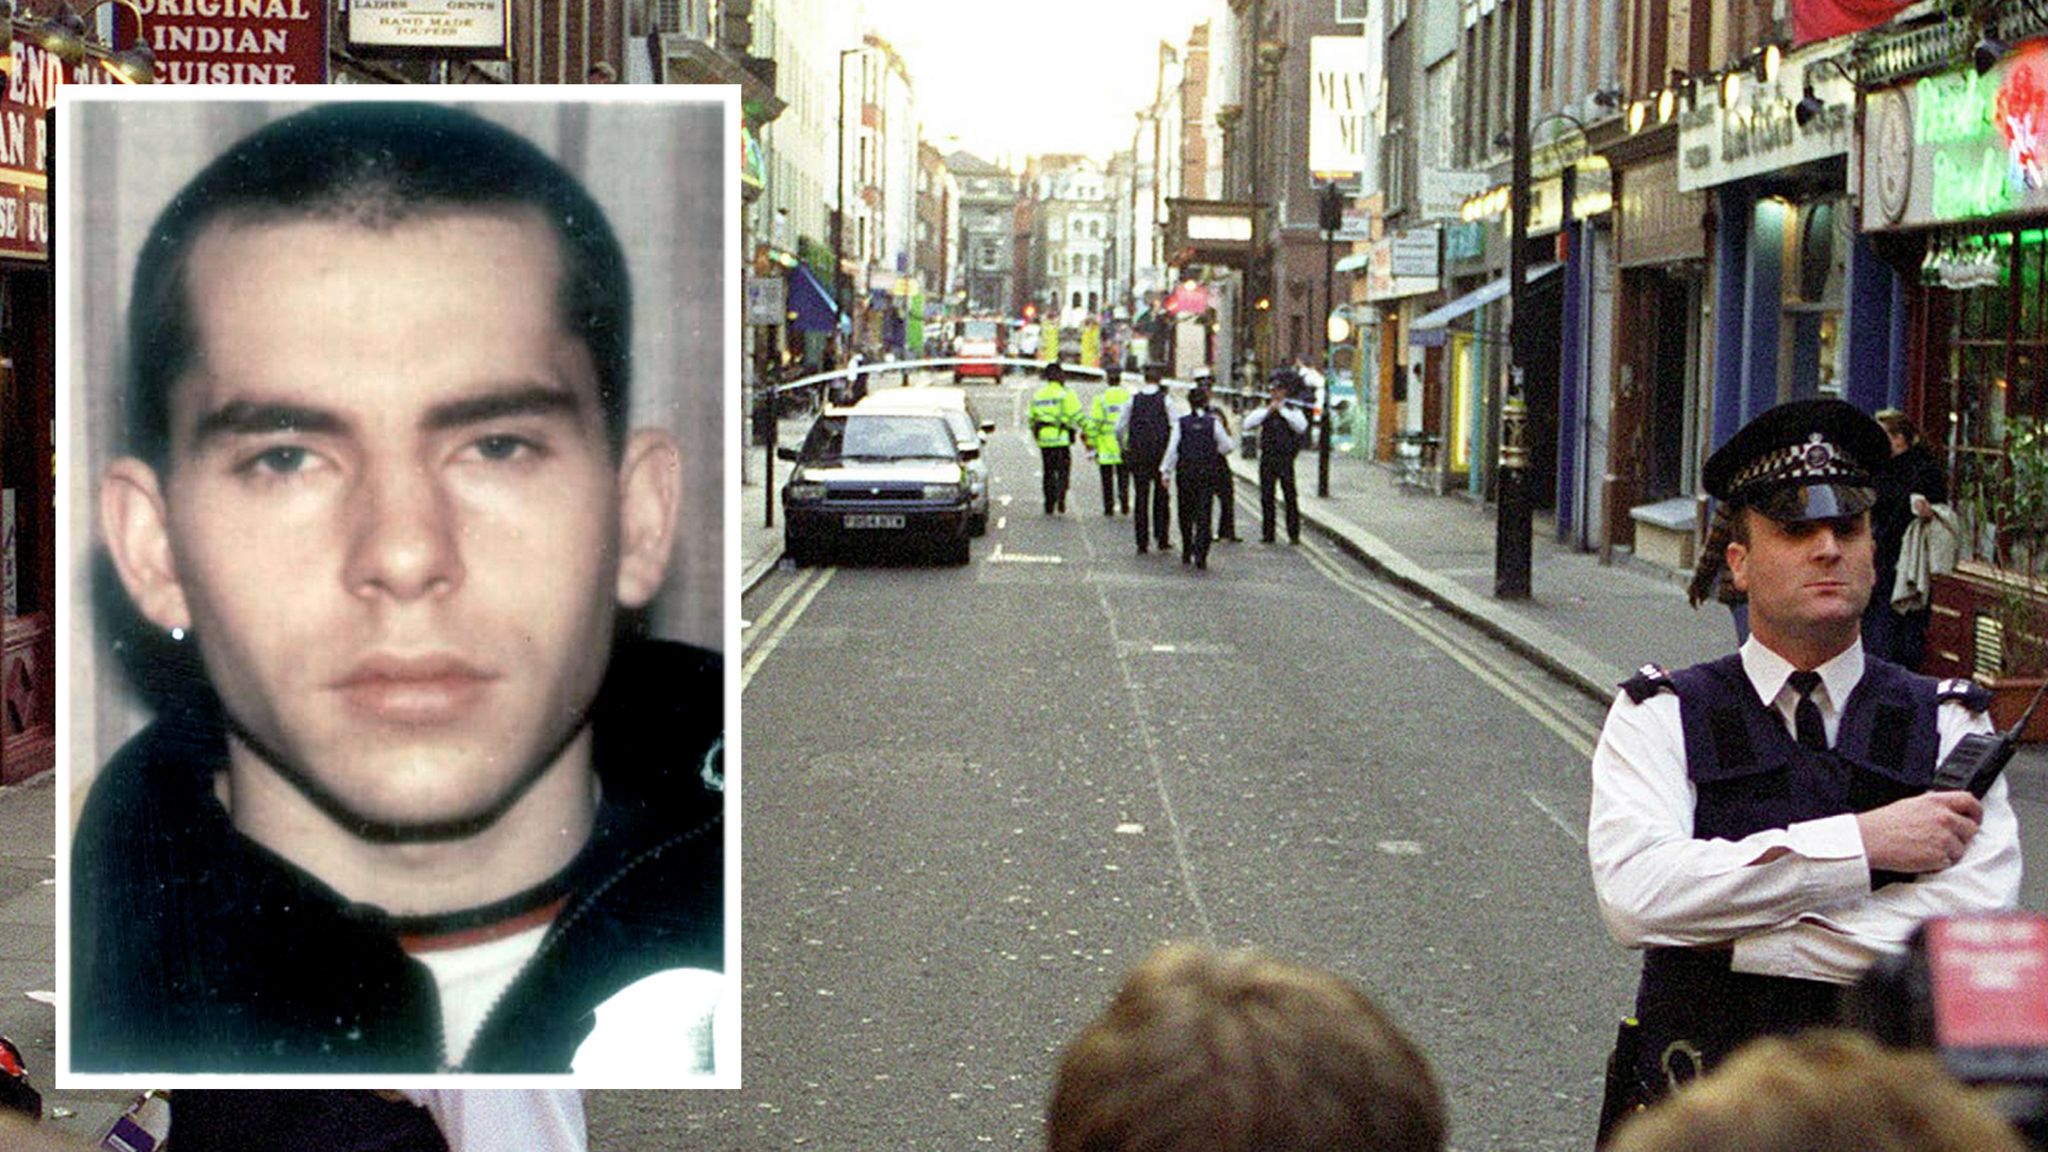 David Copeland who bombed the Admiral Duncan pub in Soho and other targets in London